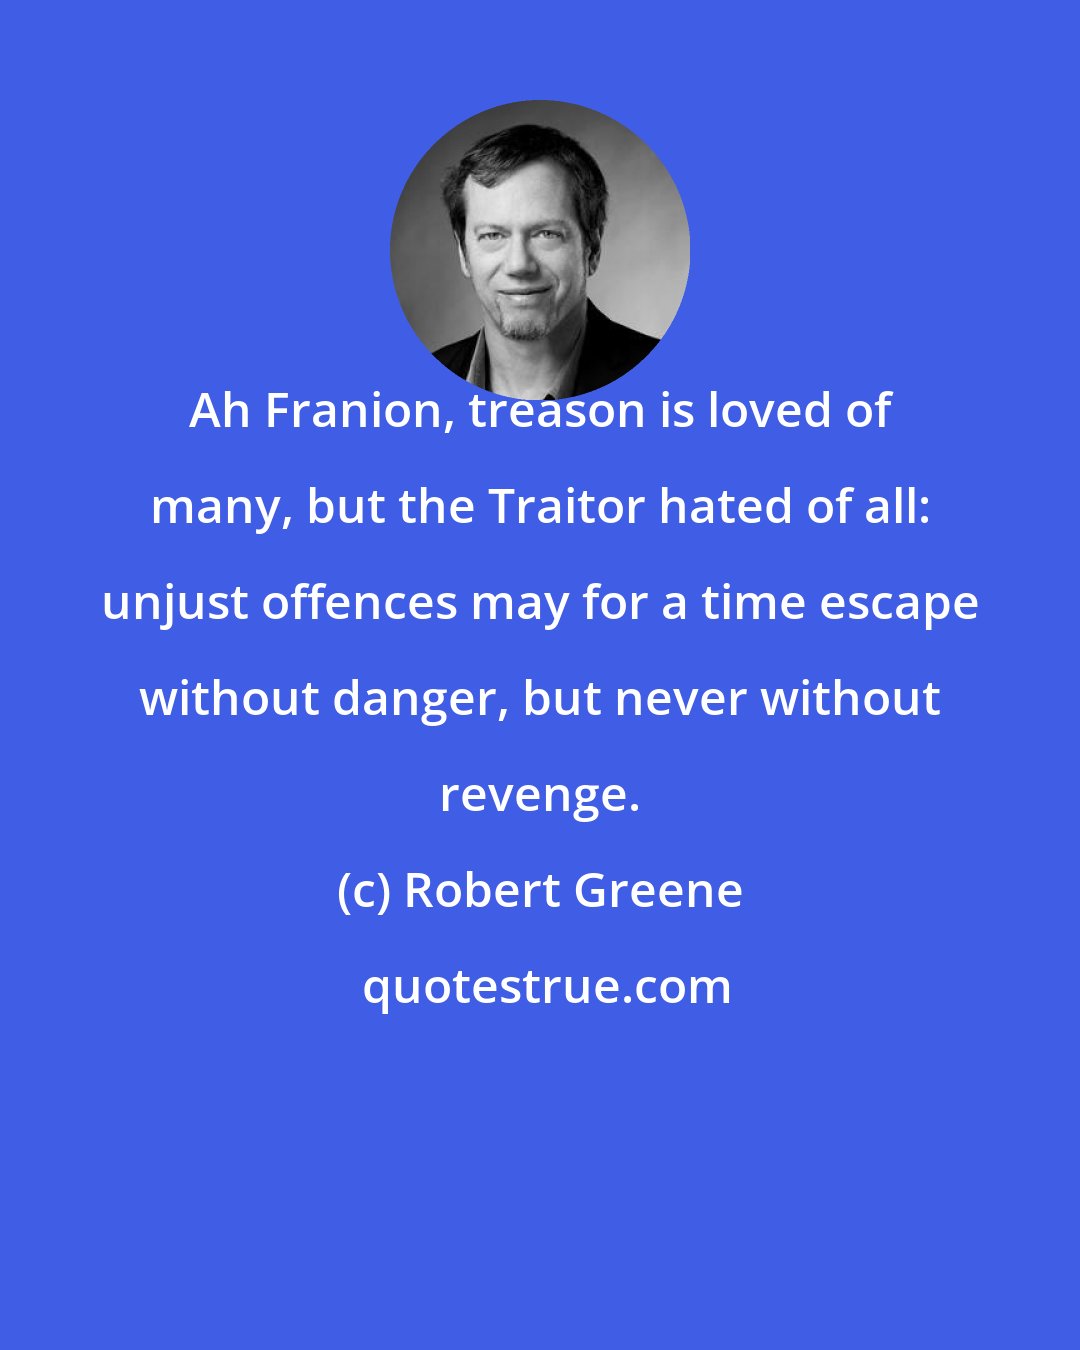 Robert Greene: Ah Franion, treason is loved of many, but the Traitor hated of all: unjust offences may for a time escape without danger, but never without revenge.